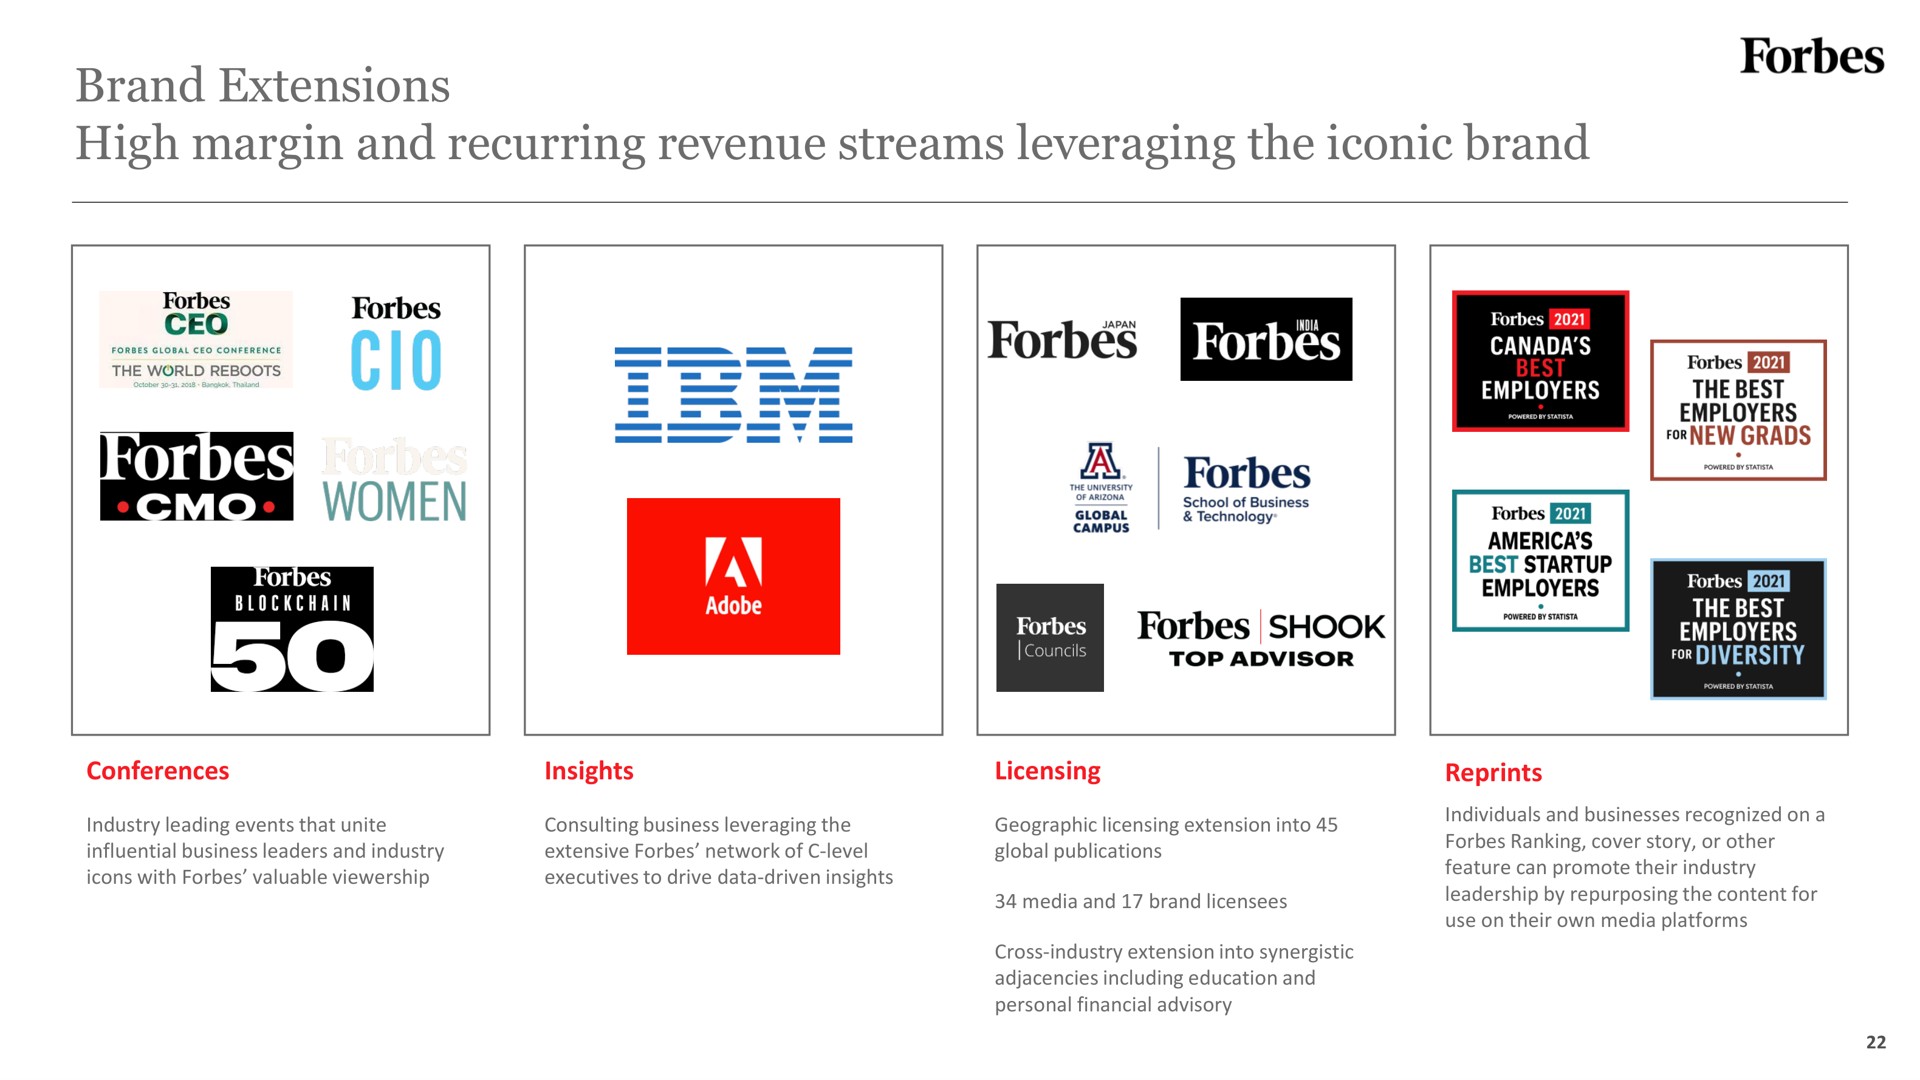 brand extensions high margin and recurring revenue streams leveraging the iconic brand | Forbes